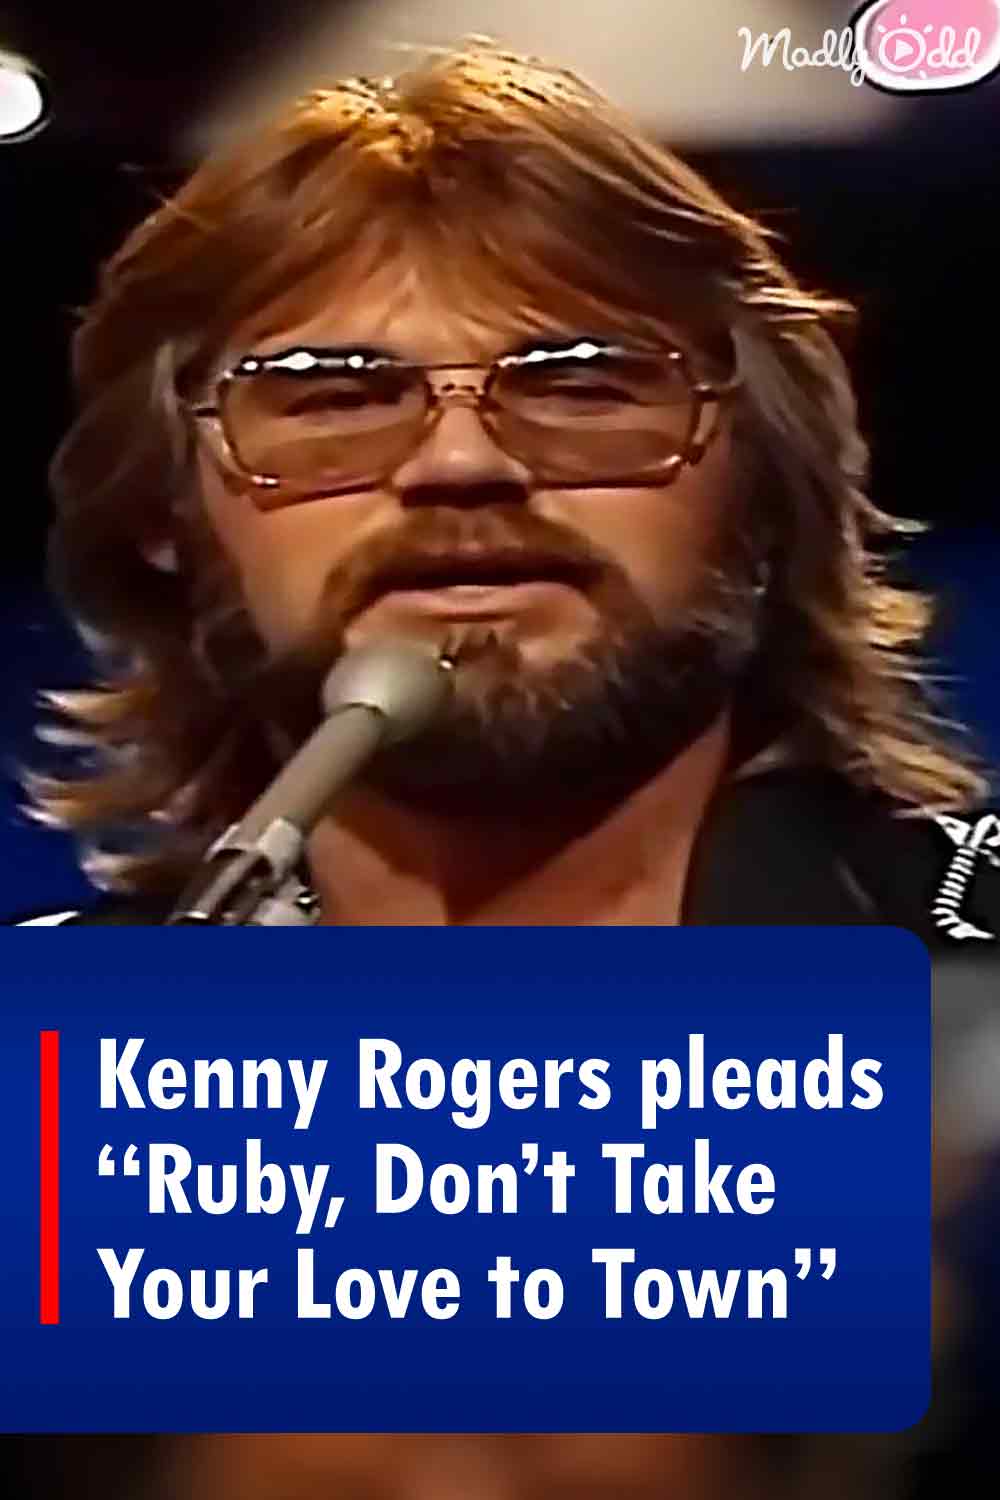 Kenny Rogers pleads “Ruby, Don’t Take Your Love to Town”